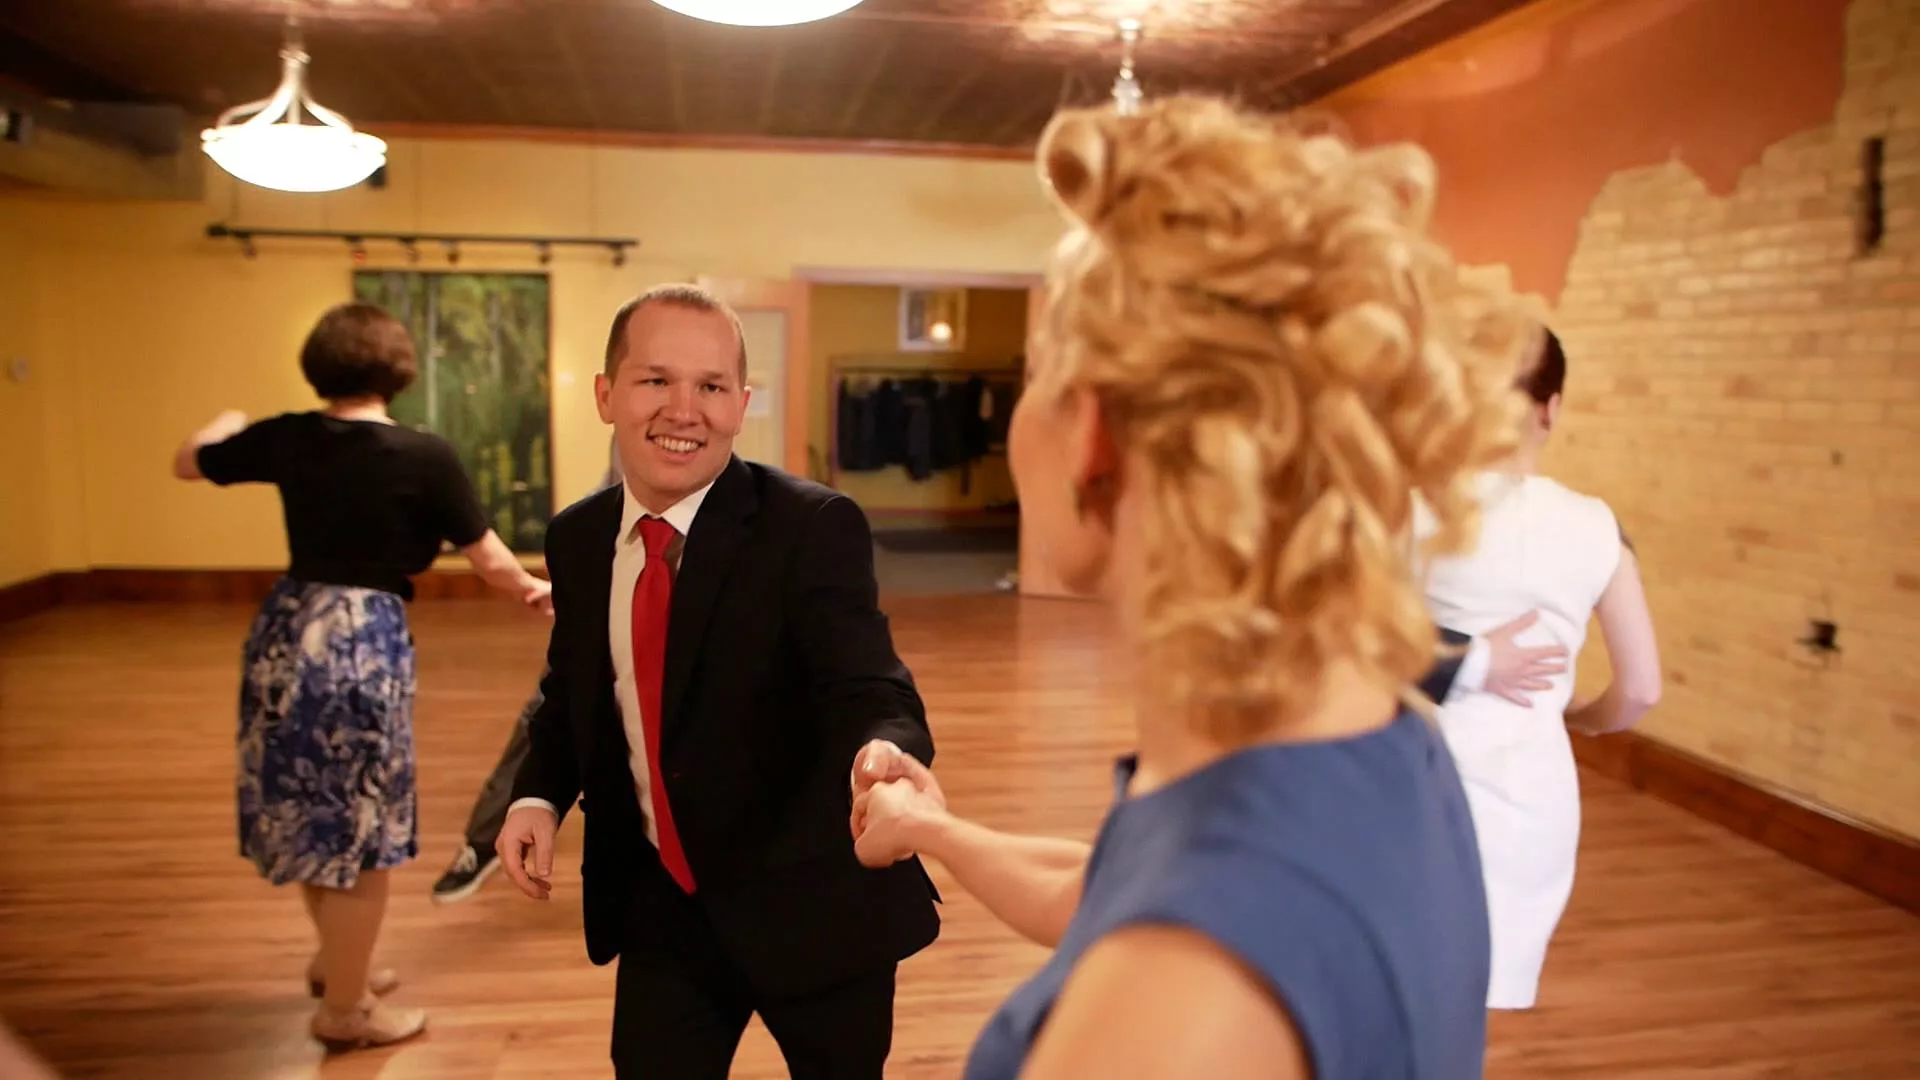 Lindy of the North - Fargo Swing Dancing